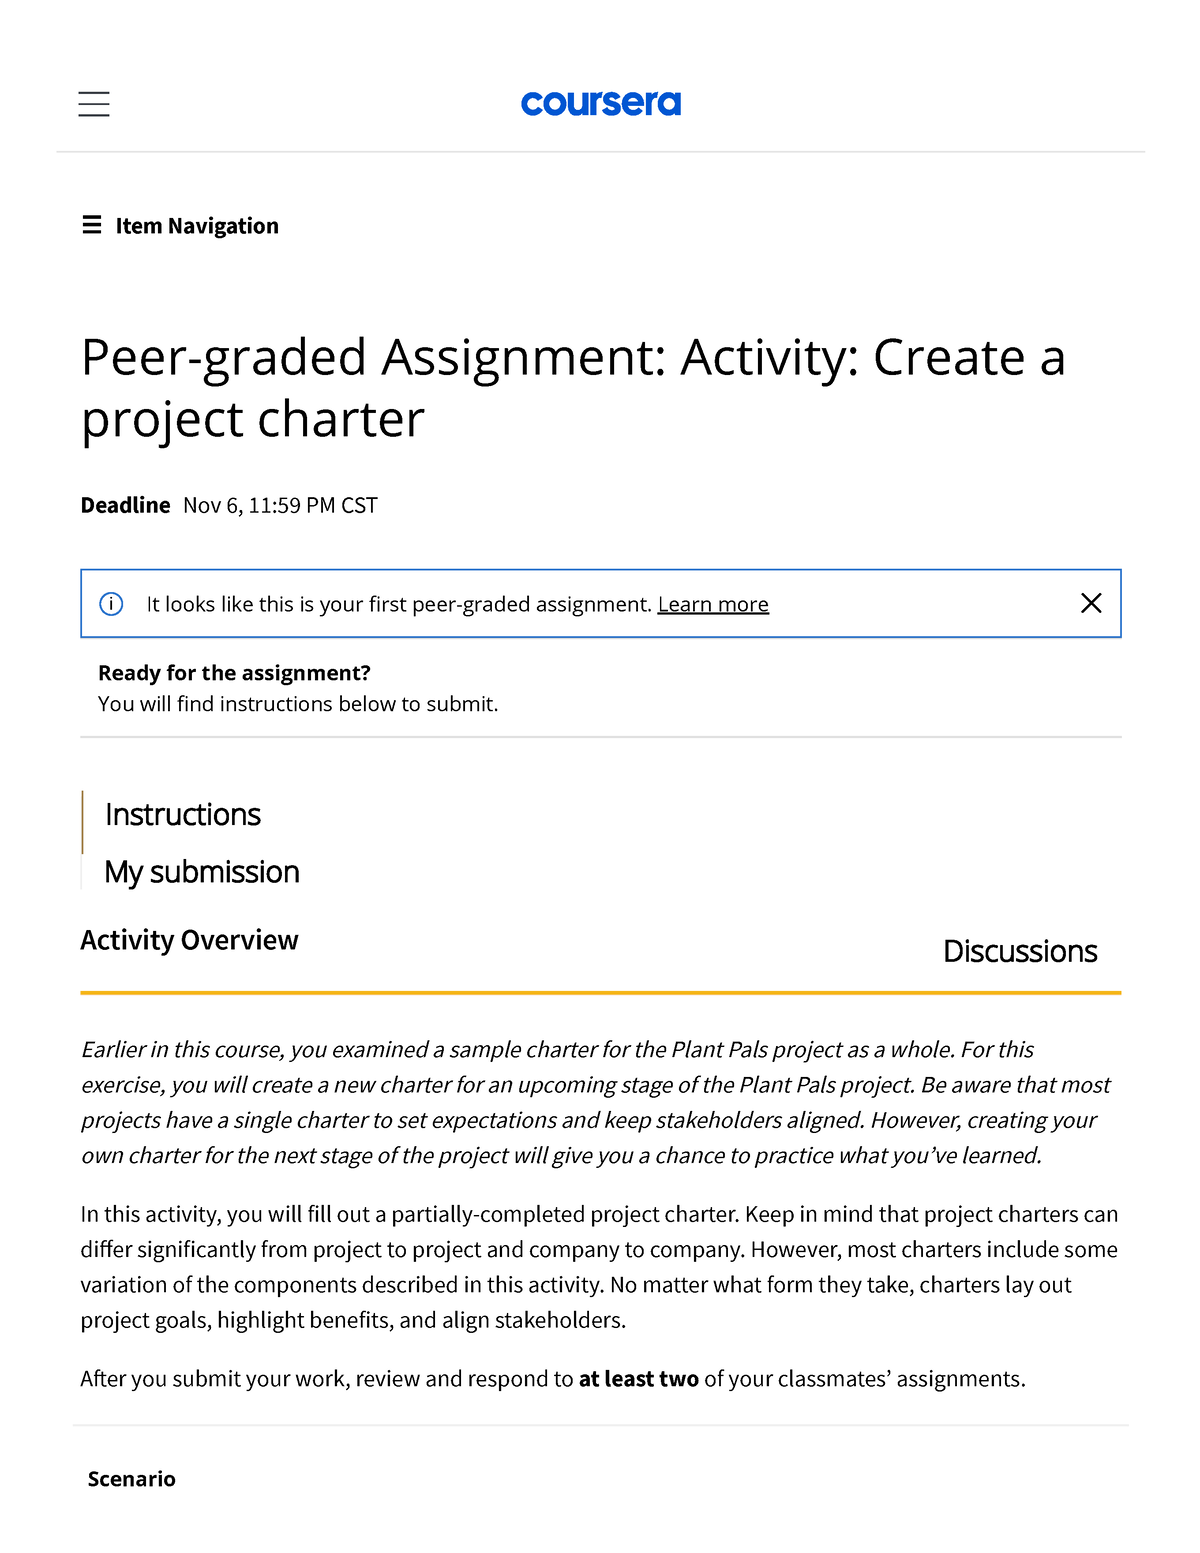 peer graded assignment project charter assignment